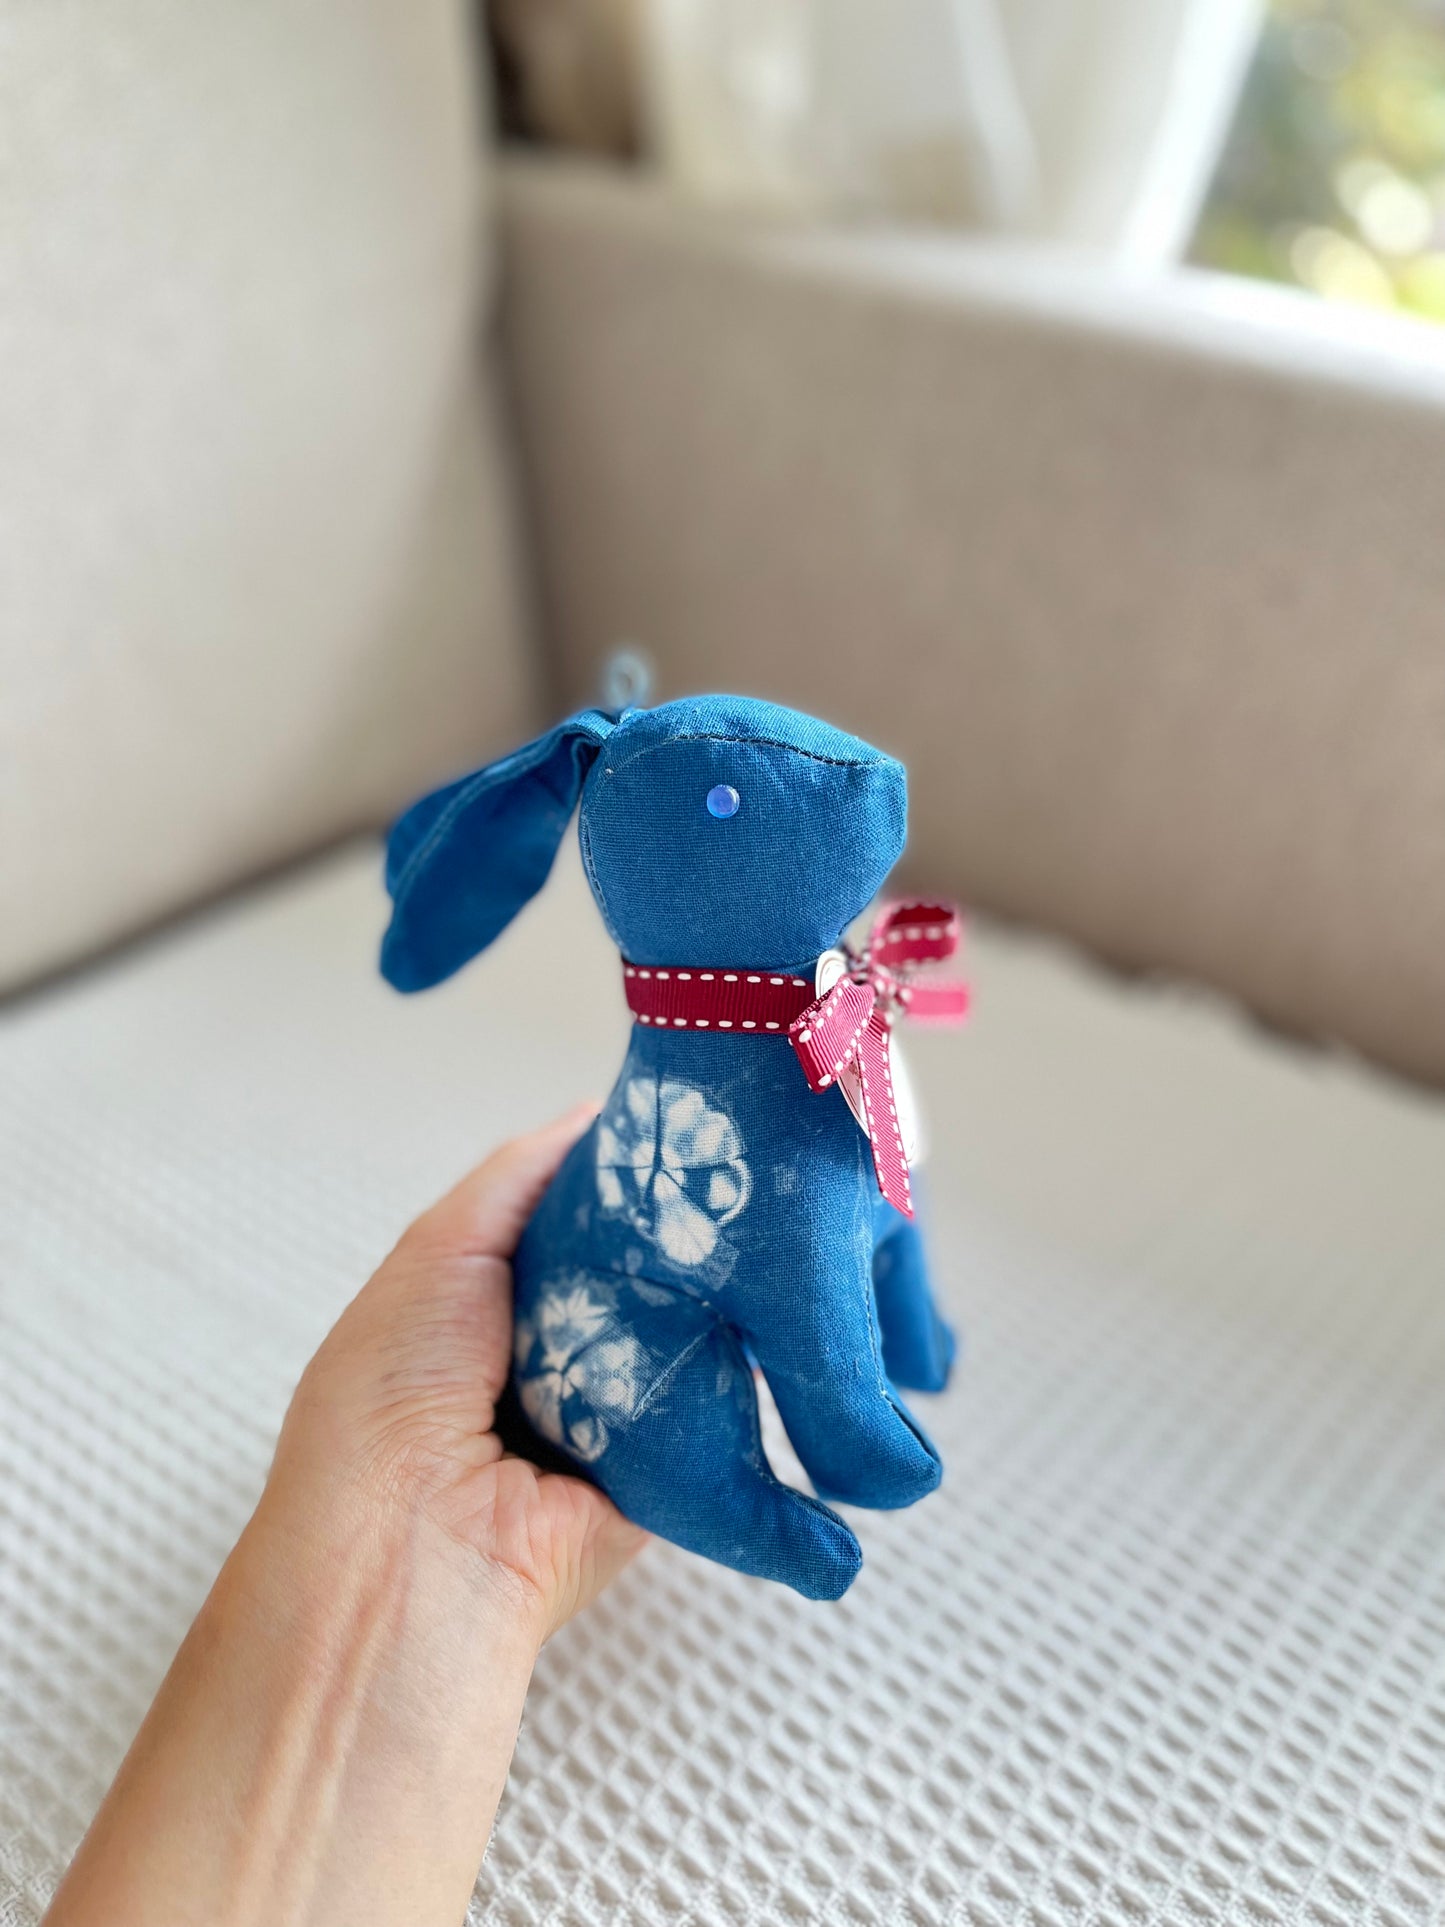 Natural indigo tie dye rabbit ornament, sachet, pendant with lavender scented for bunny lovers. Bunny soft toys, wedding chic gift!